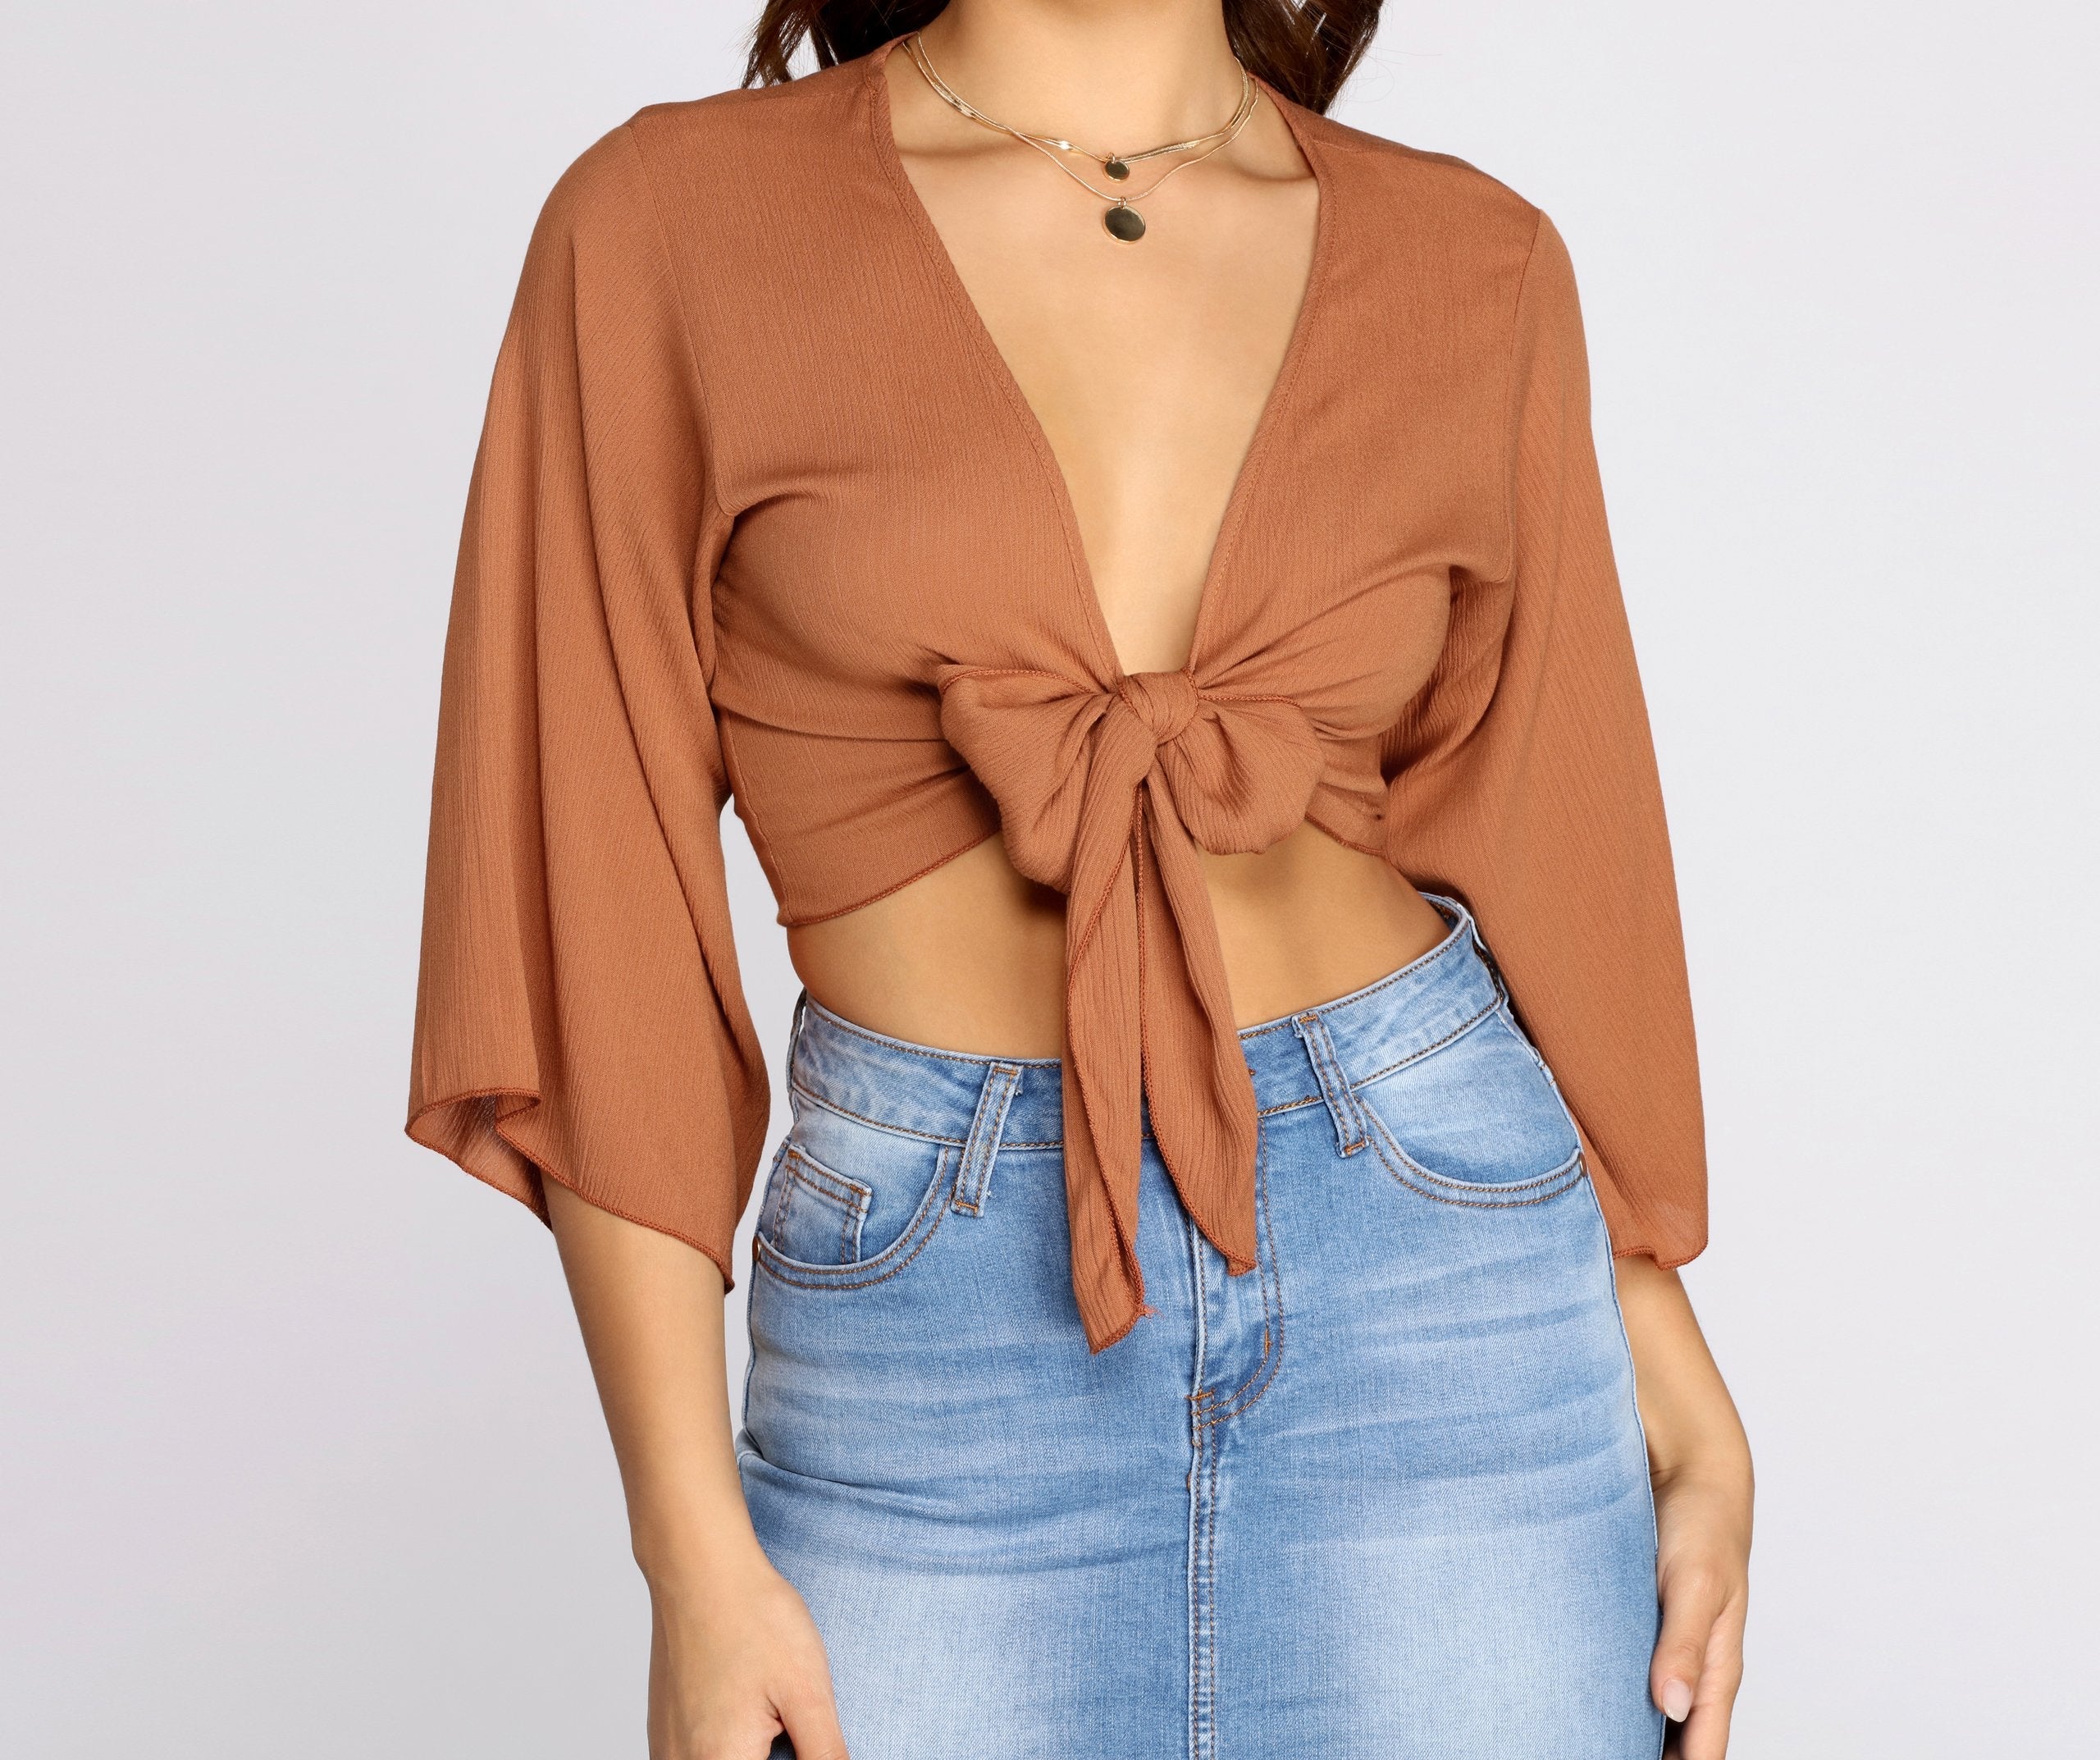 Go With The Flow Kimono Sleeve Top - Lady Occasions